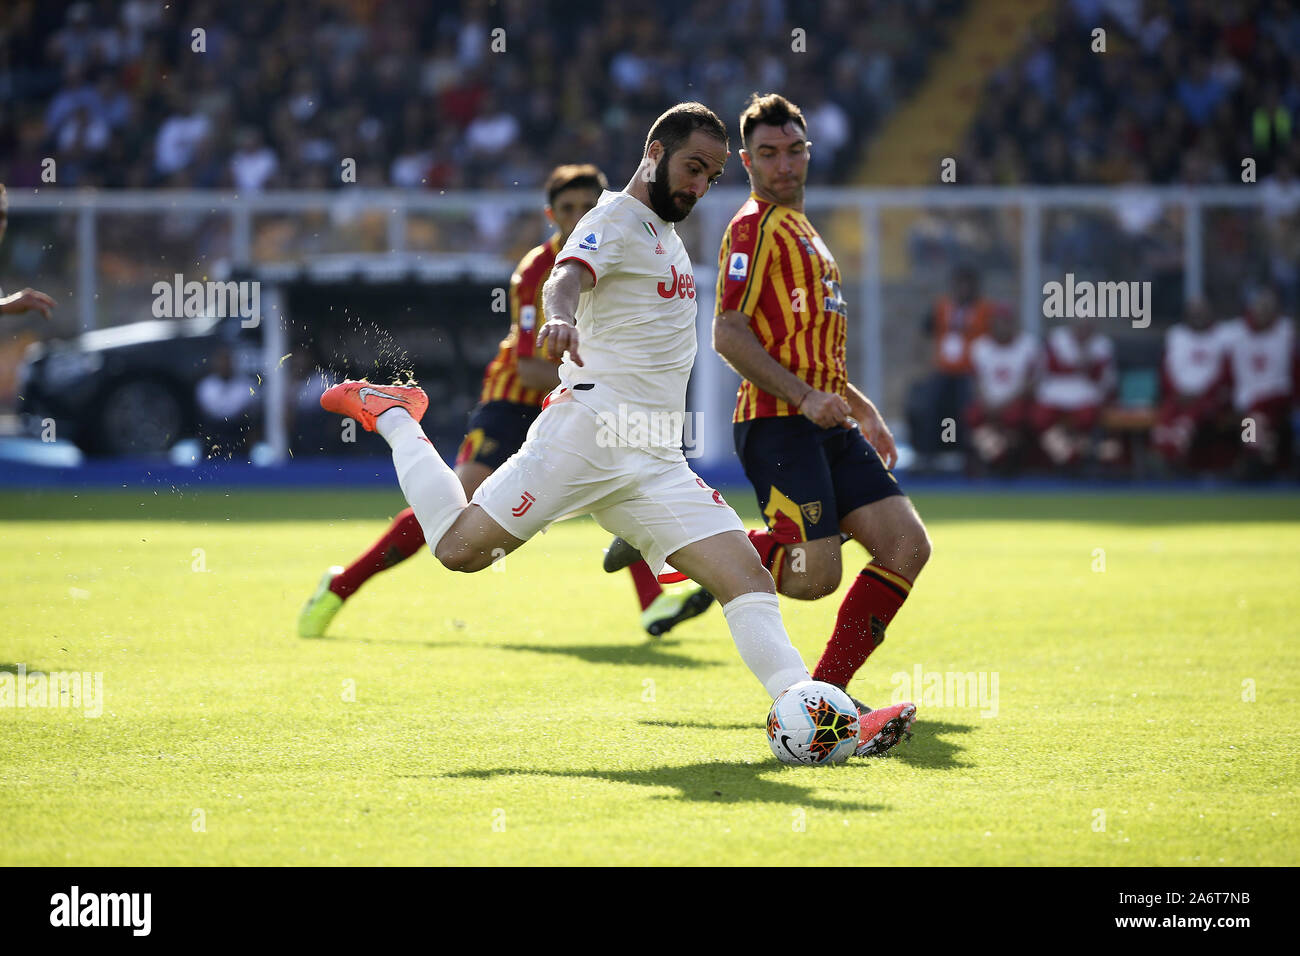 Lecce, Italy. 26th Oct, 2019. soccer, SERIES A TIM CHAMPIONSHIP 20189-20 LECCE - JUVENTUS 1-1 in the picture: HIGUAIN Credit: Independent Photo Agency/Alamy Live News Stock Photo